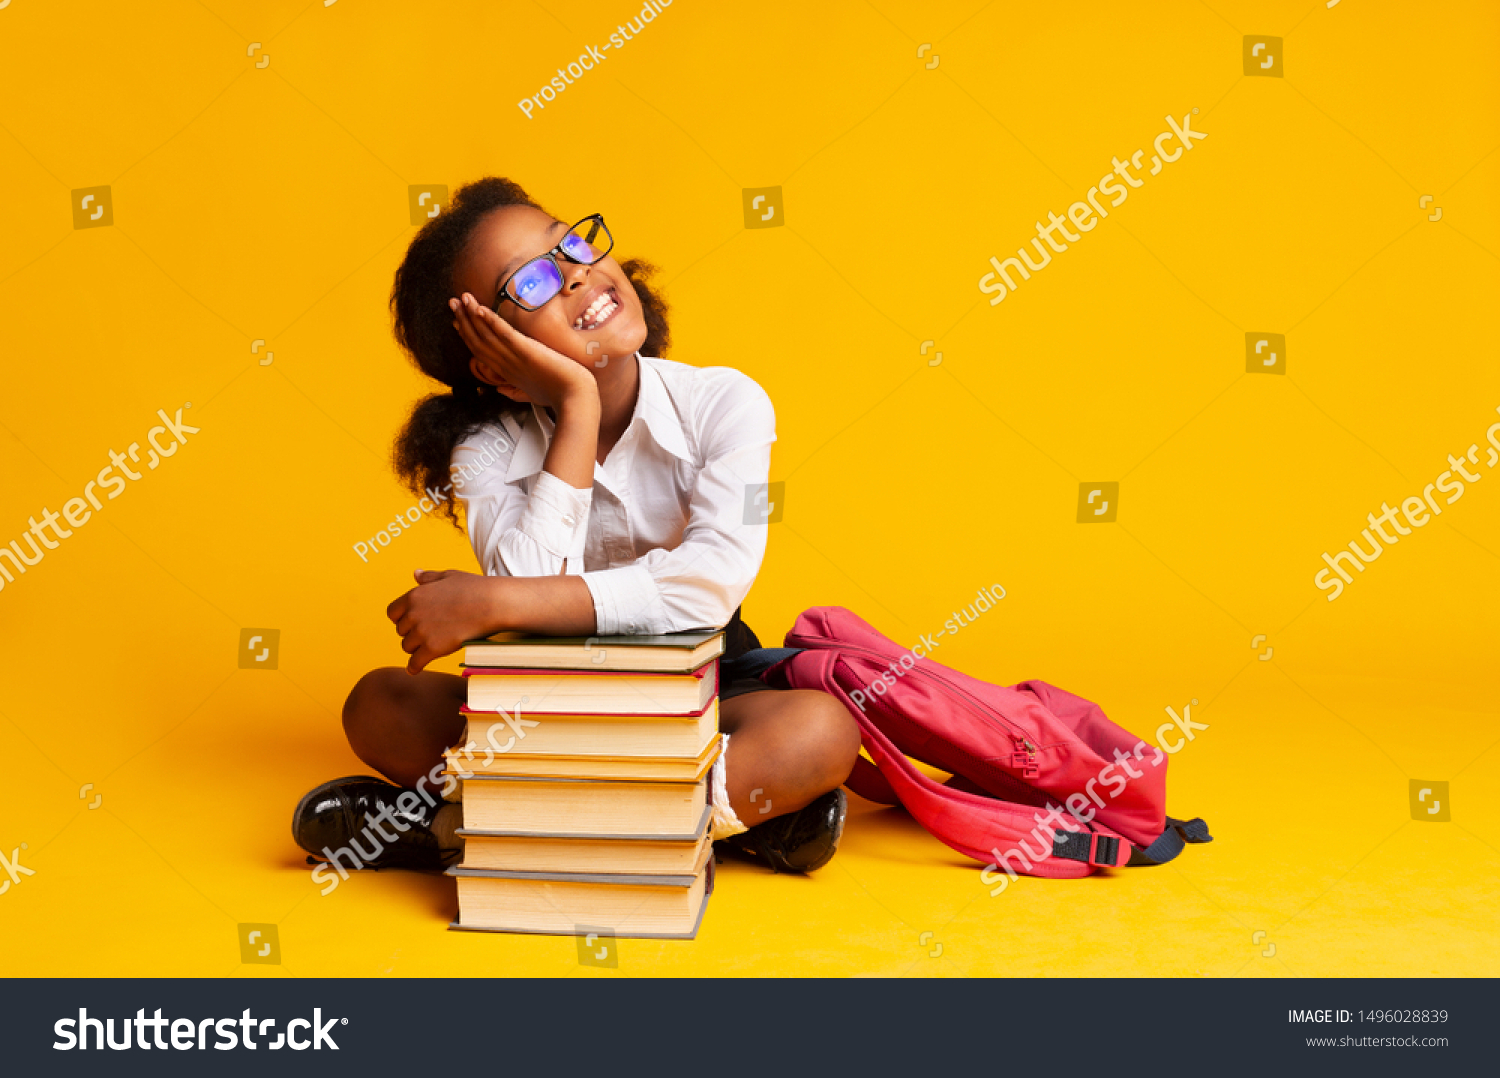 Cheerful African American Schoolgirl Dreaming Sitting At Book Stack Over Yellow Background In Studio. Copy Space #1496028839